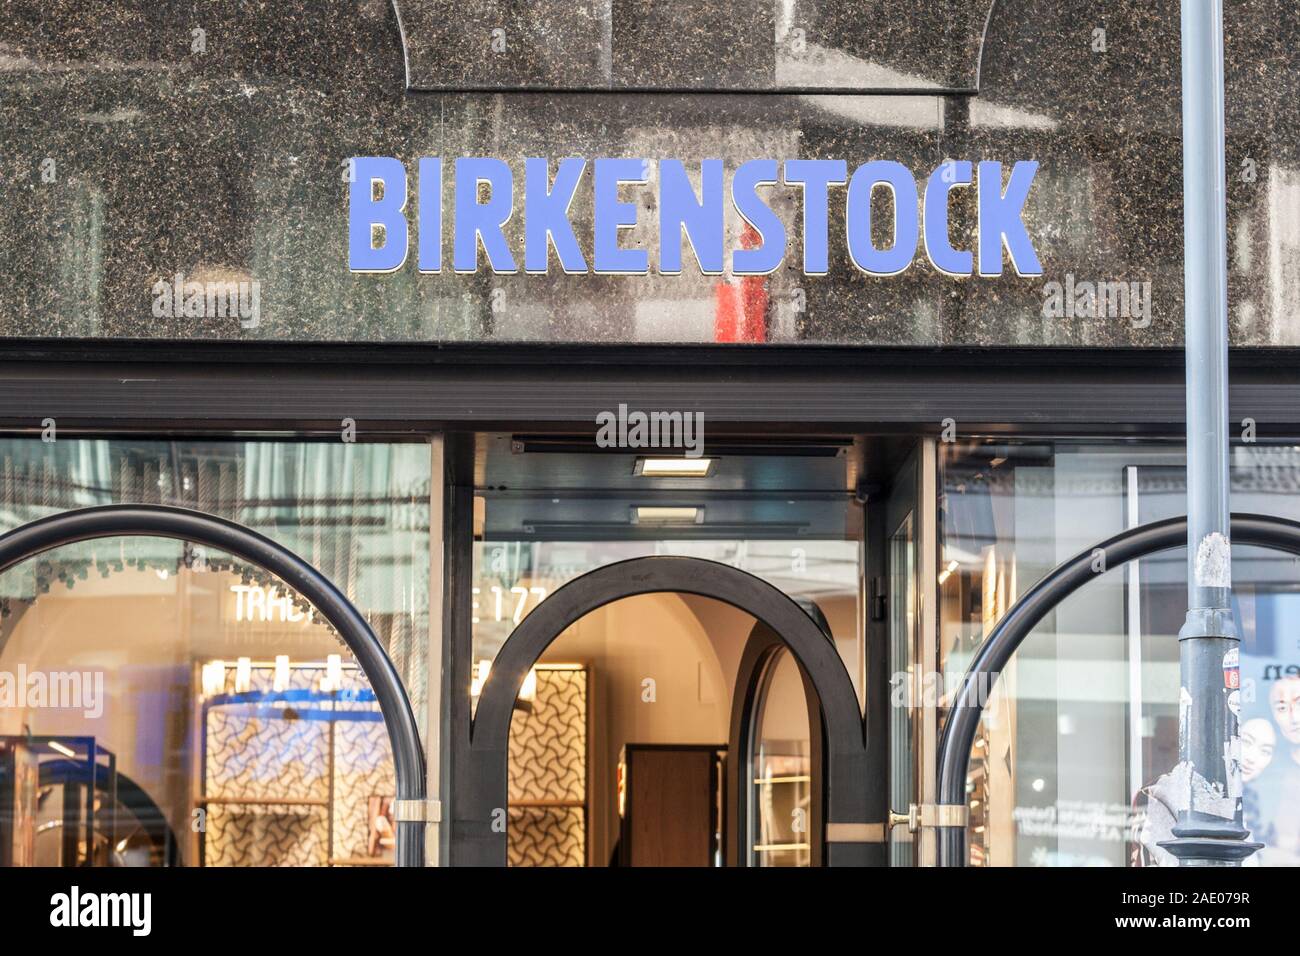 Birkenstock High Resolution Stock Photography and Images - Alamy